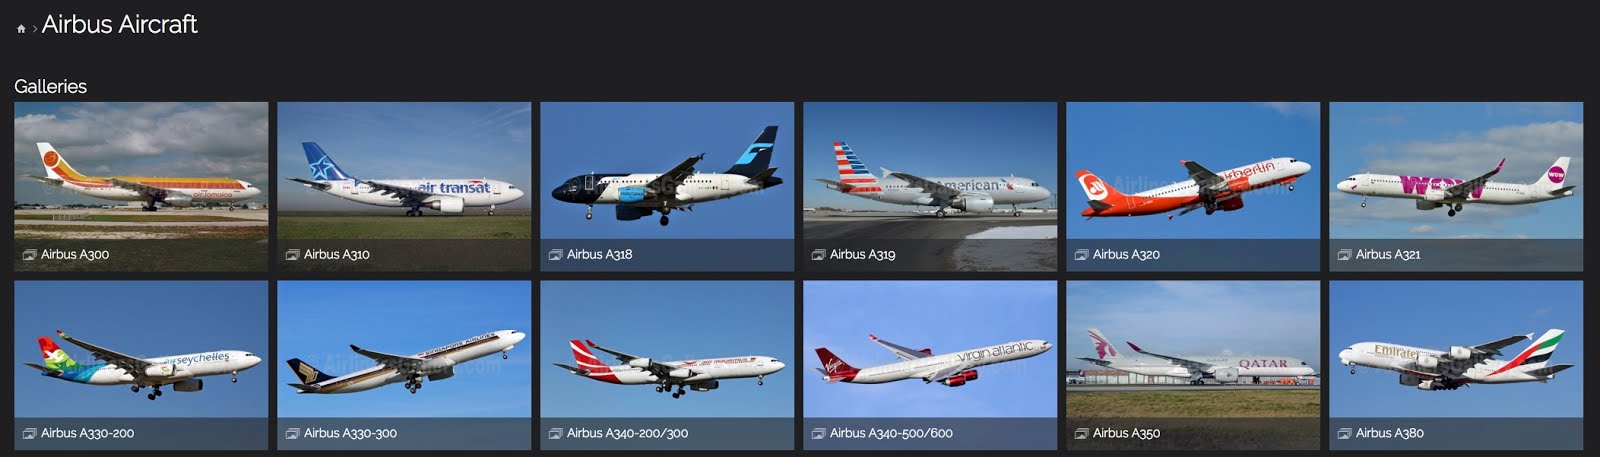 Airbus Airliners: Airbus A350 Slide Show